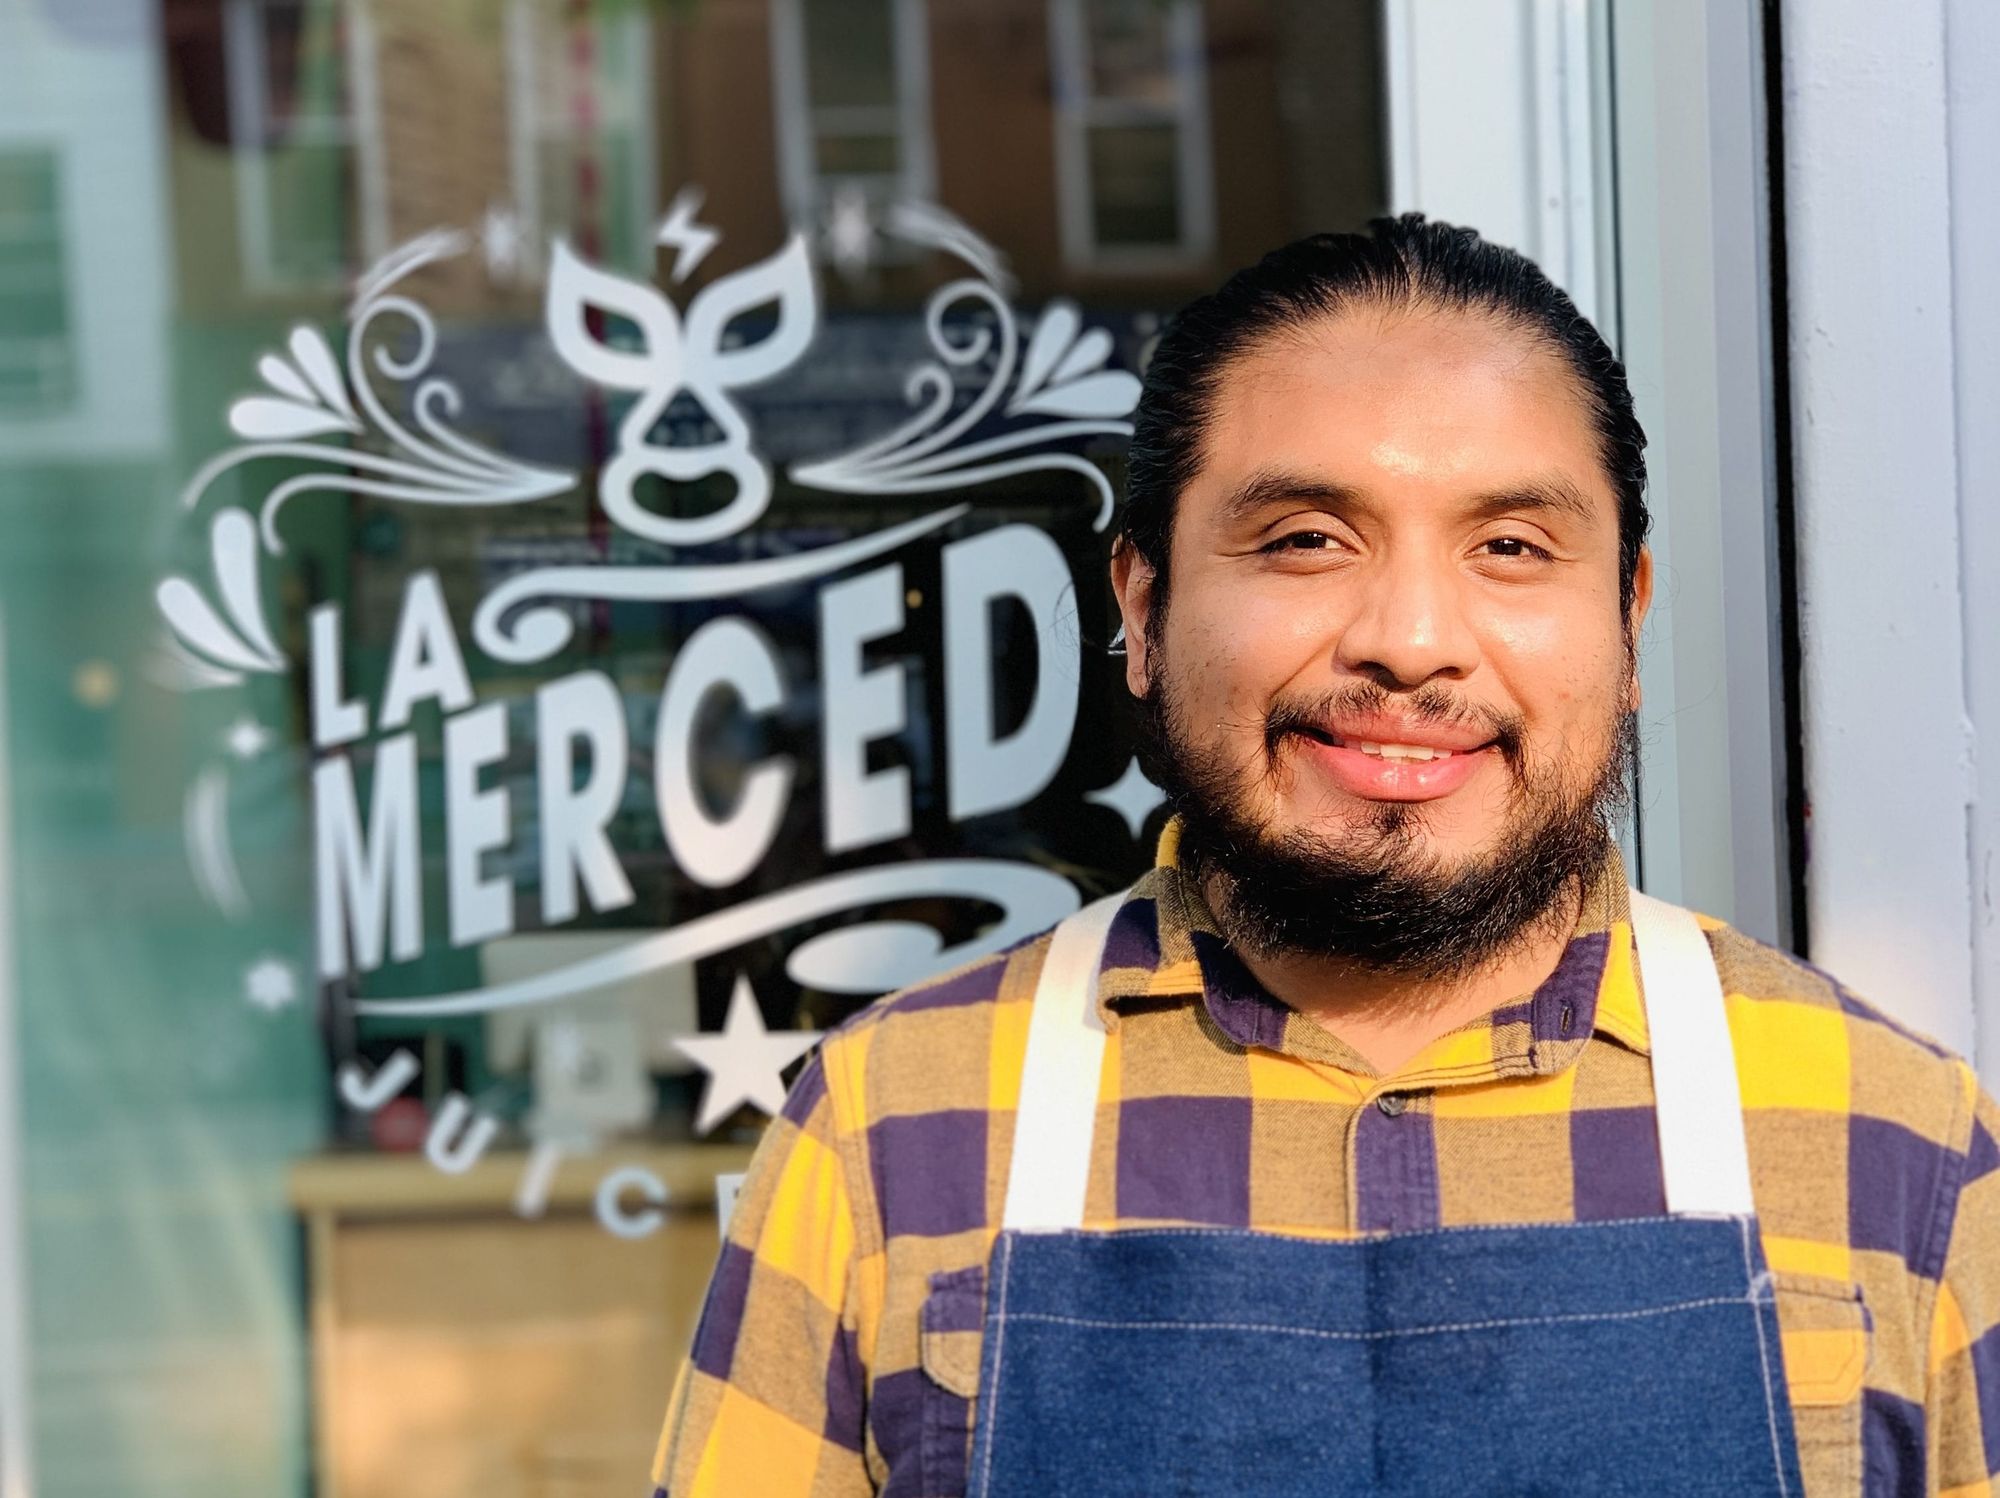 Immigrant-Owned Businesses Were Hardest Hit by Covid, but a Sliver of Hope Lies in Greenpoint’s ‘La Merced’